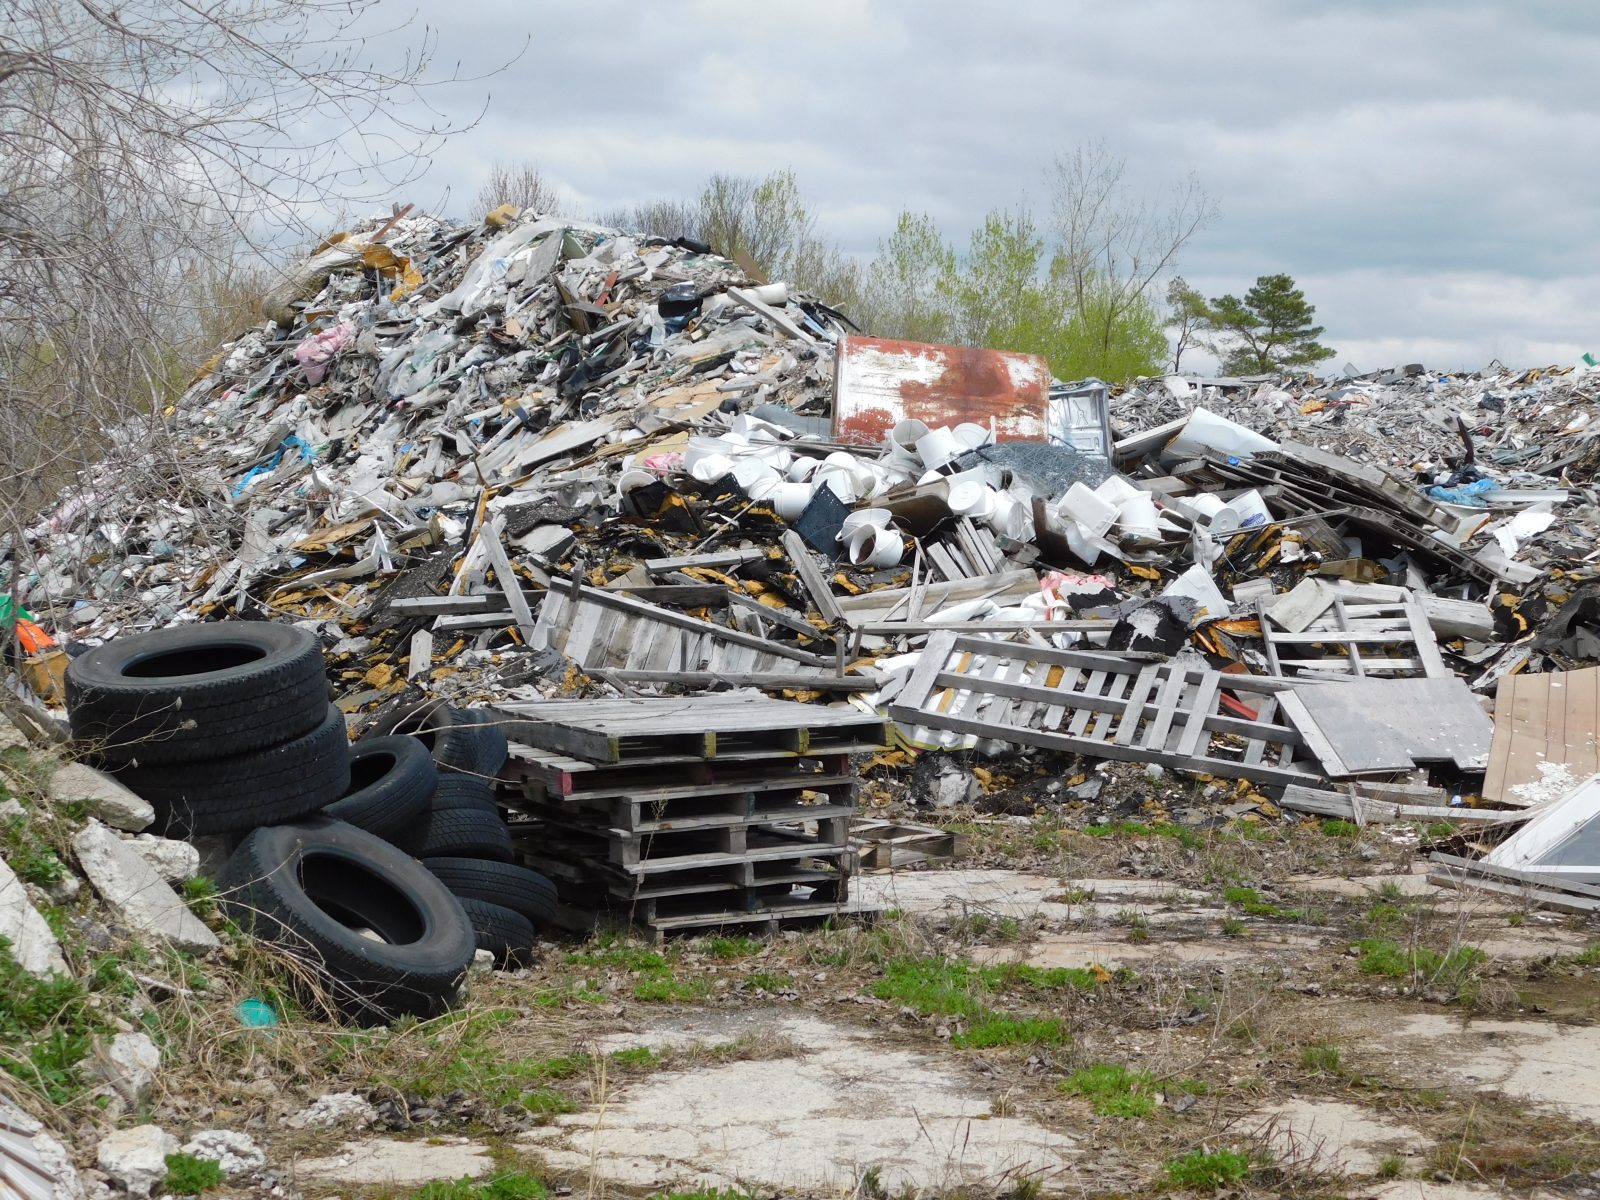 Illegal dump site waits for clean up